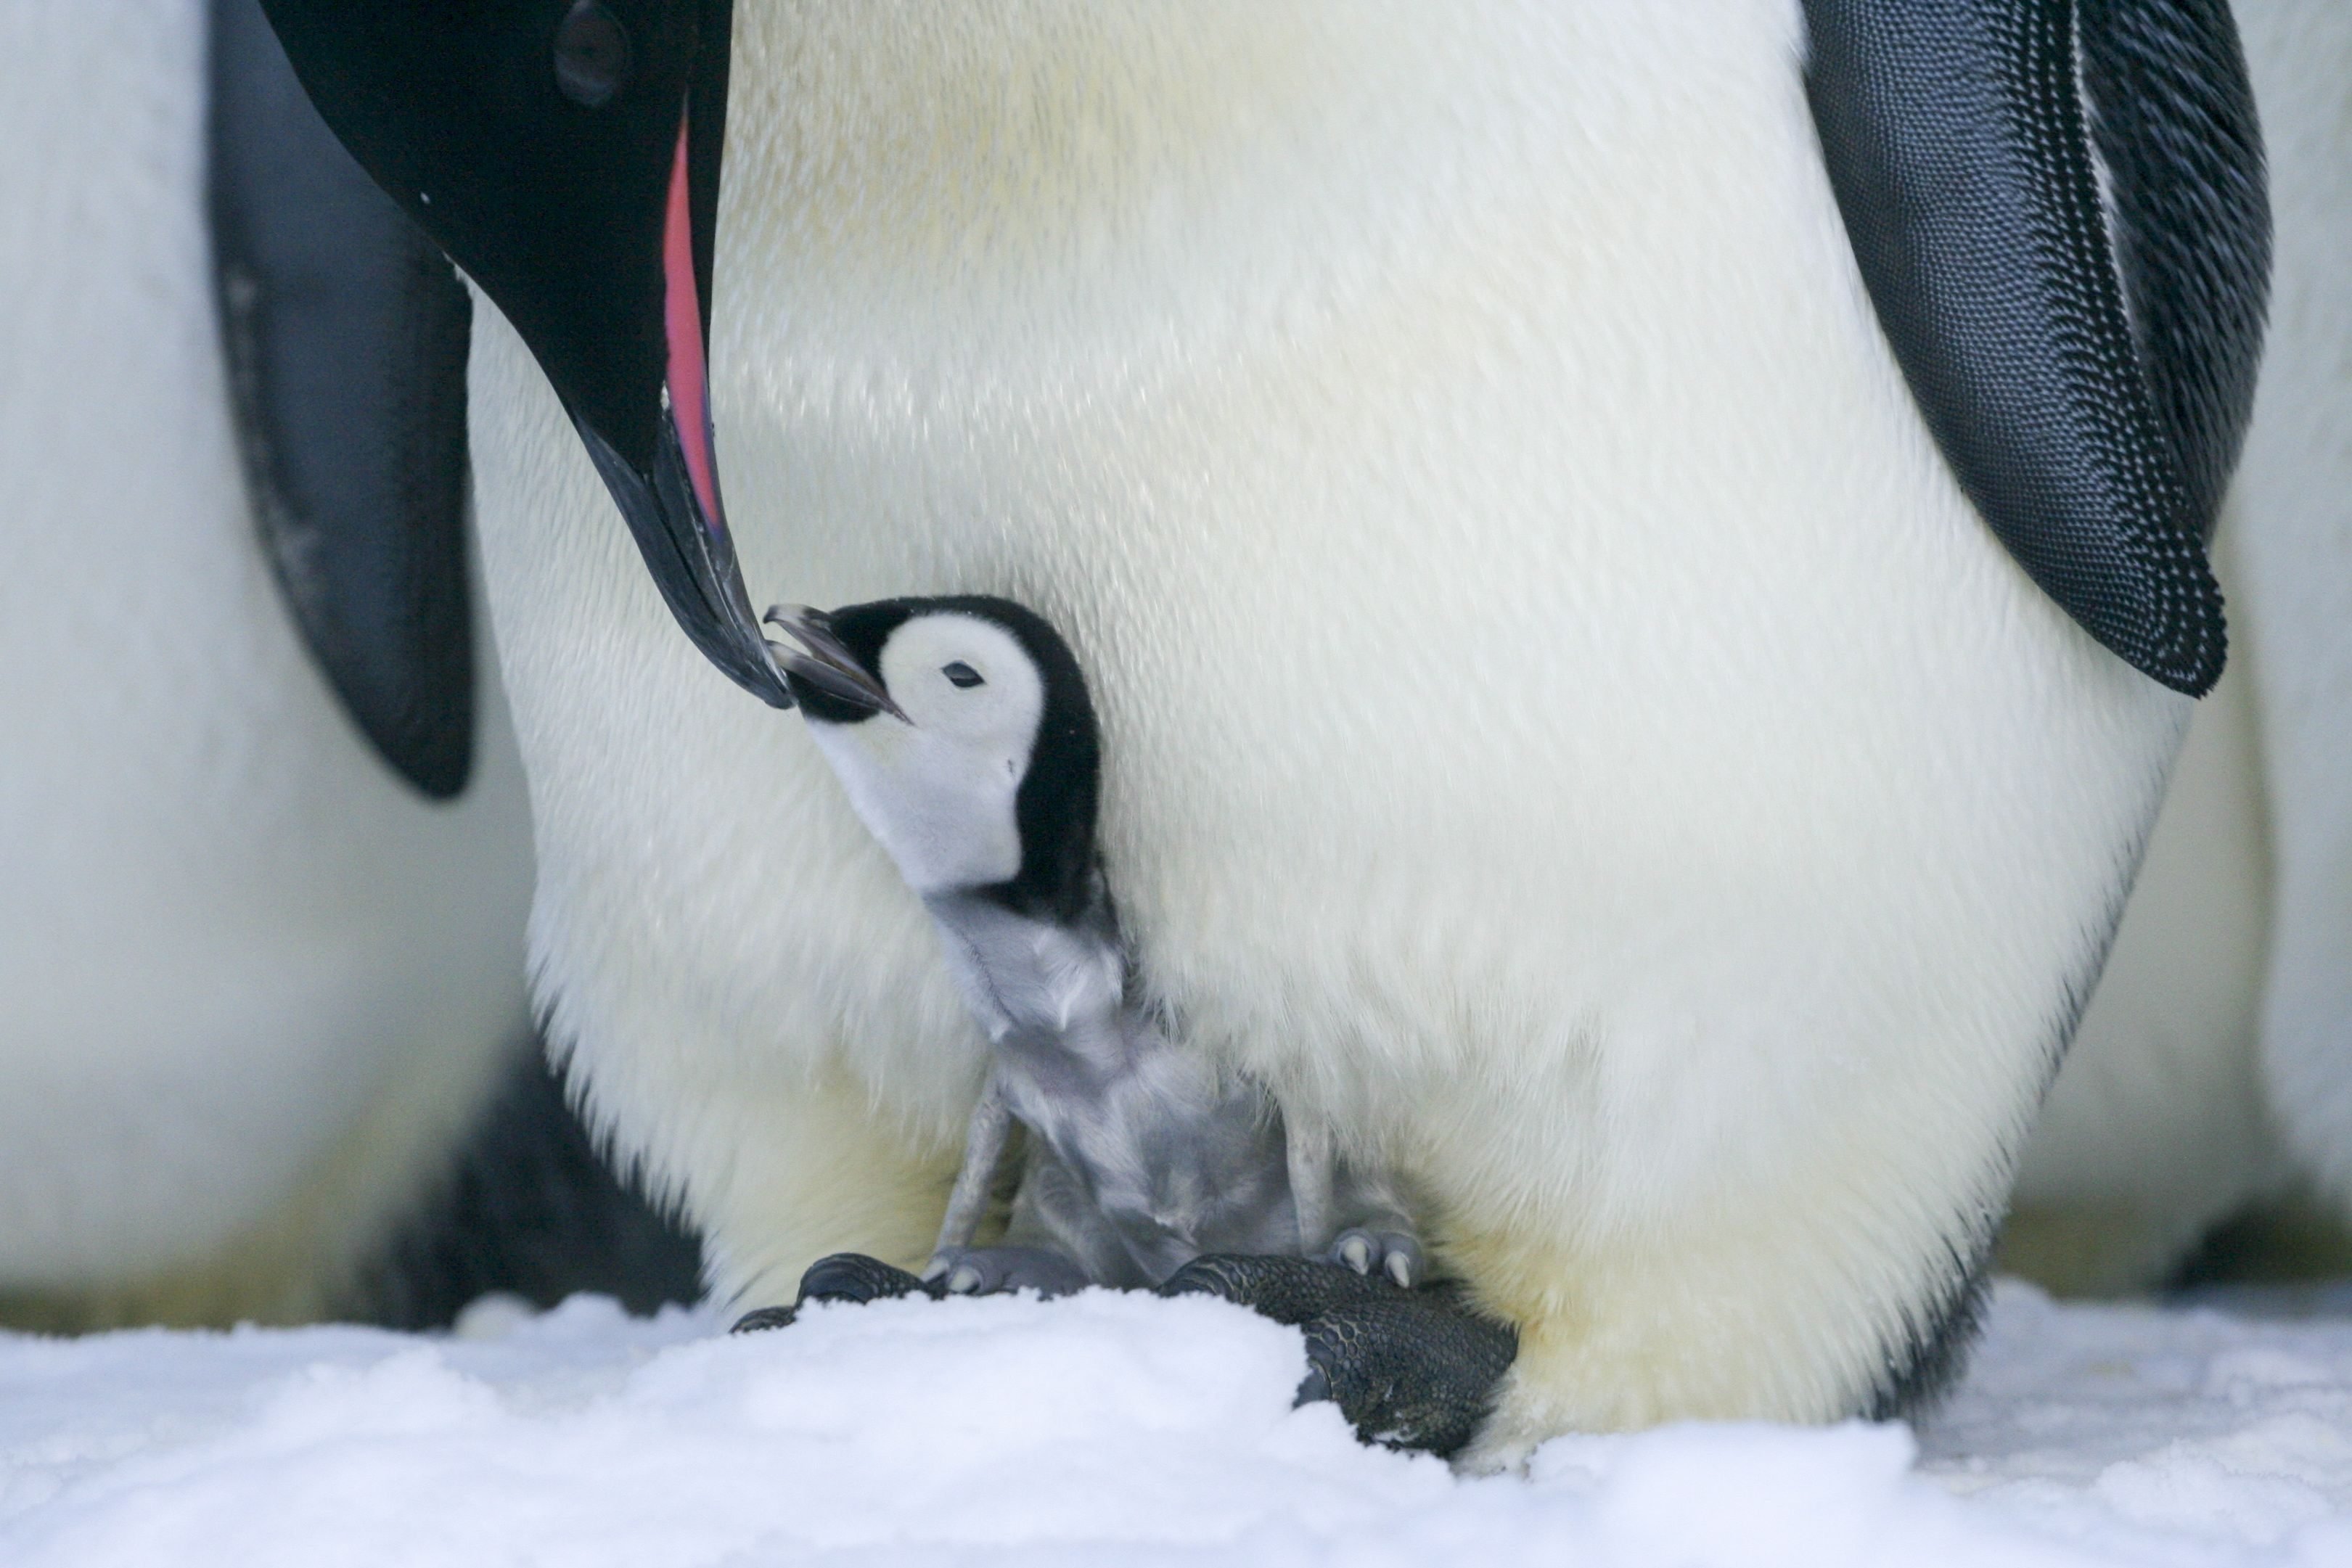 Mandatory Credit: Photo by Samuel Blanc/Solent News/Shutterstock (5501876d) This incredible photograph shows the powerful bond between a father and baby penguin as they huddle for warmth. The tiny grey chick has not yet grown its waterproof feathers, so it shelters from the Antarctic winter by perching on its parent's feet. Emperor penguins in the Antarctic - 22 Dec 2015 Every once in a while the loving dad will lower his neck towards the ground to check that the baby penguin is okay. This adorable pair are just two of many Emperor penguins, with around 3000 other pairs in the enormous colony. Field guide Samuel Blanc captured these stunning photographs during a 15 month stay at a French research station in Terre Adélie, Antarctica.